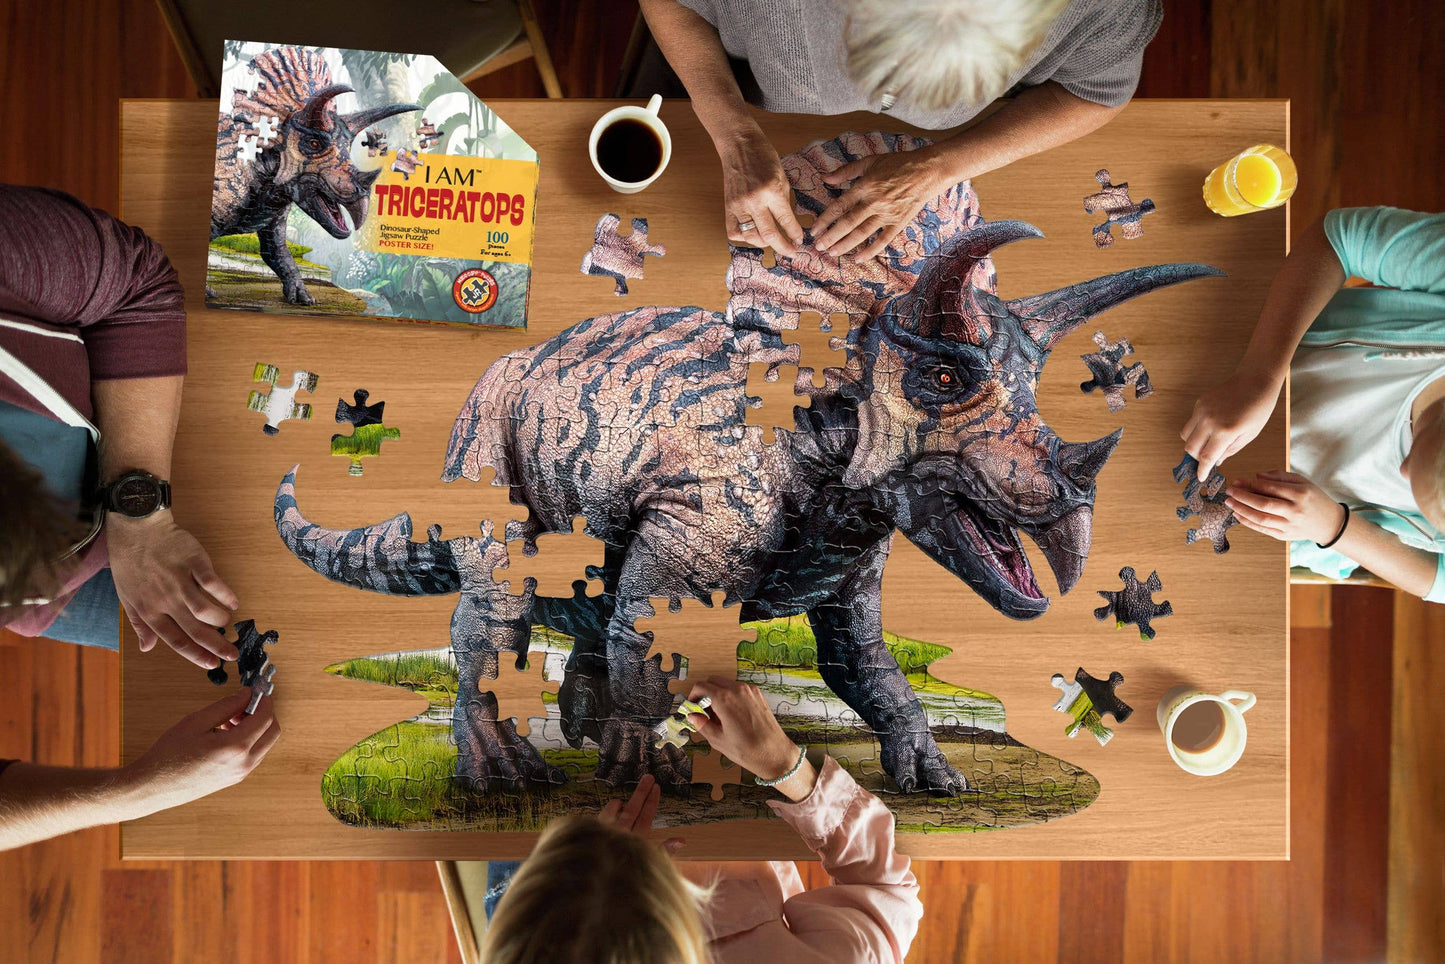 Madd Capp Games & Puzzles - I AM Triceratops 100 piece jigsaw puzzle - gift